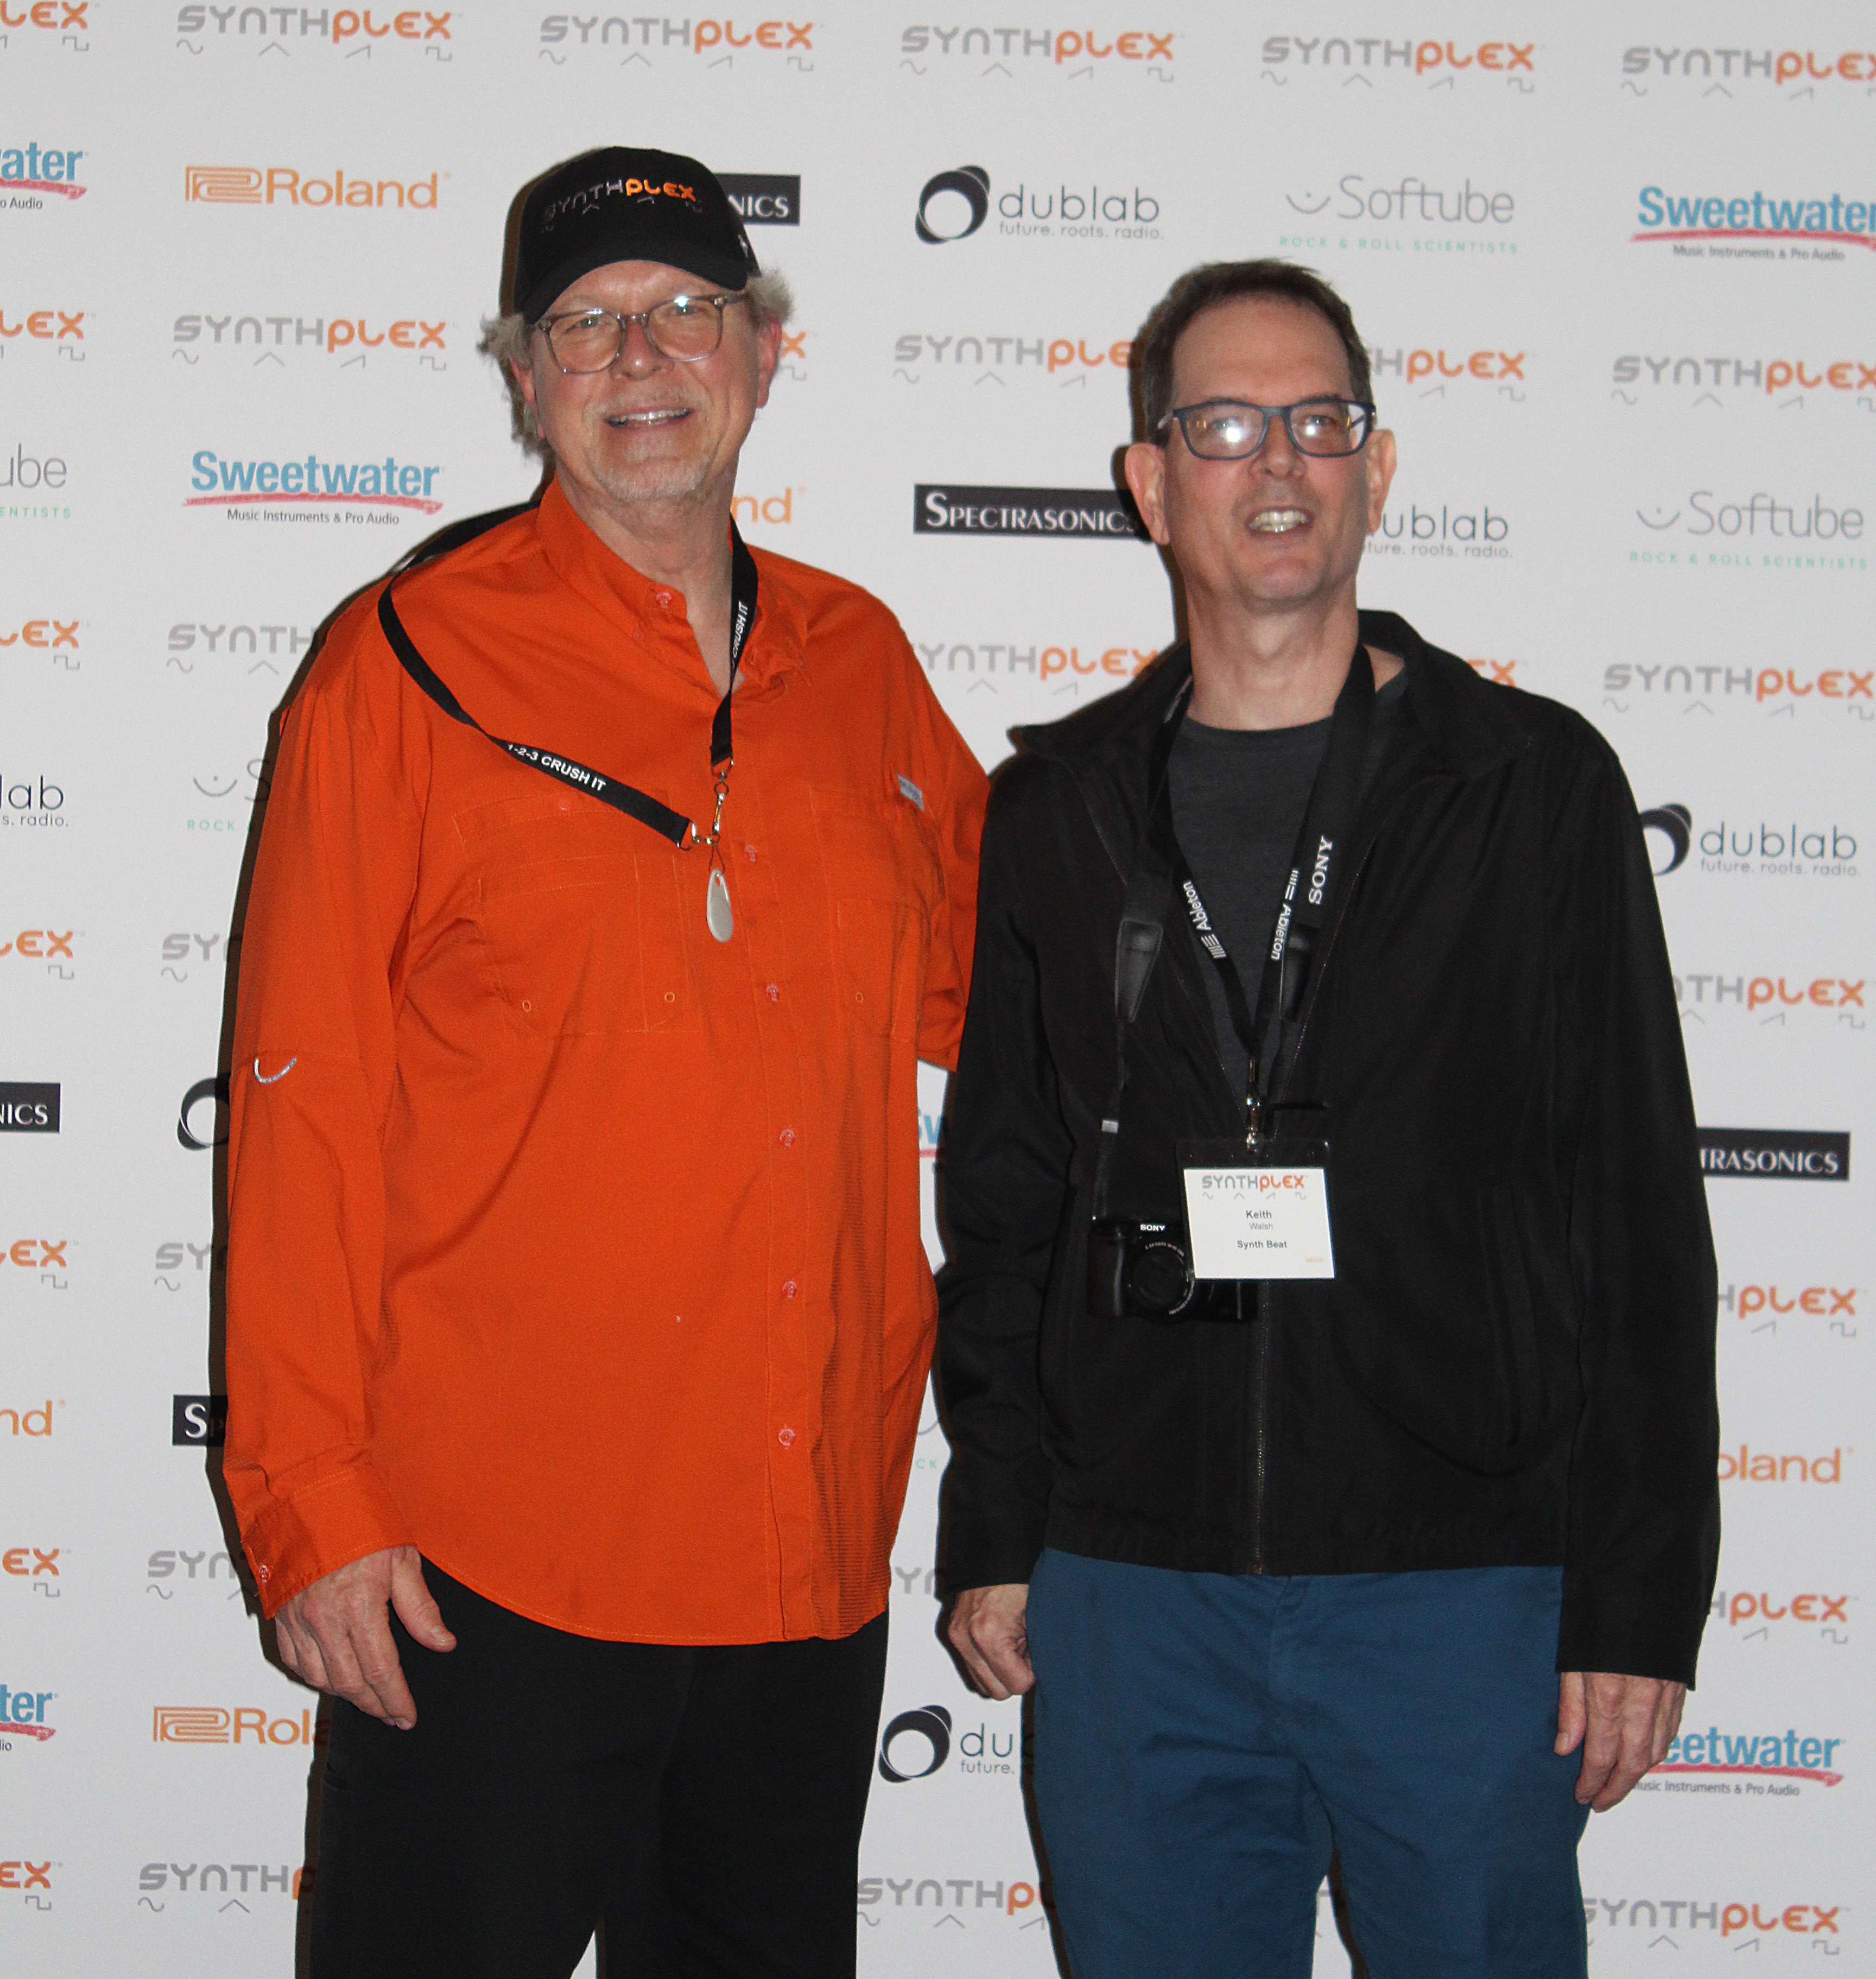 michael boddicker and keith walsh at synthplex 2019